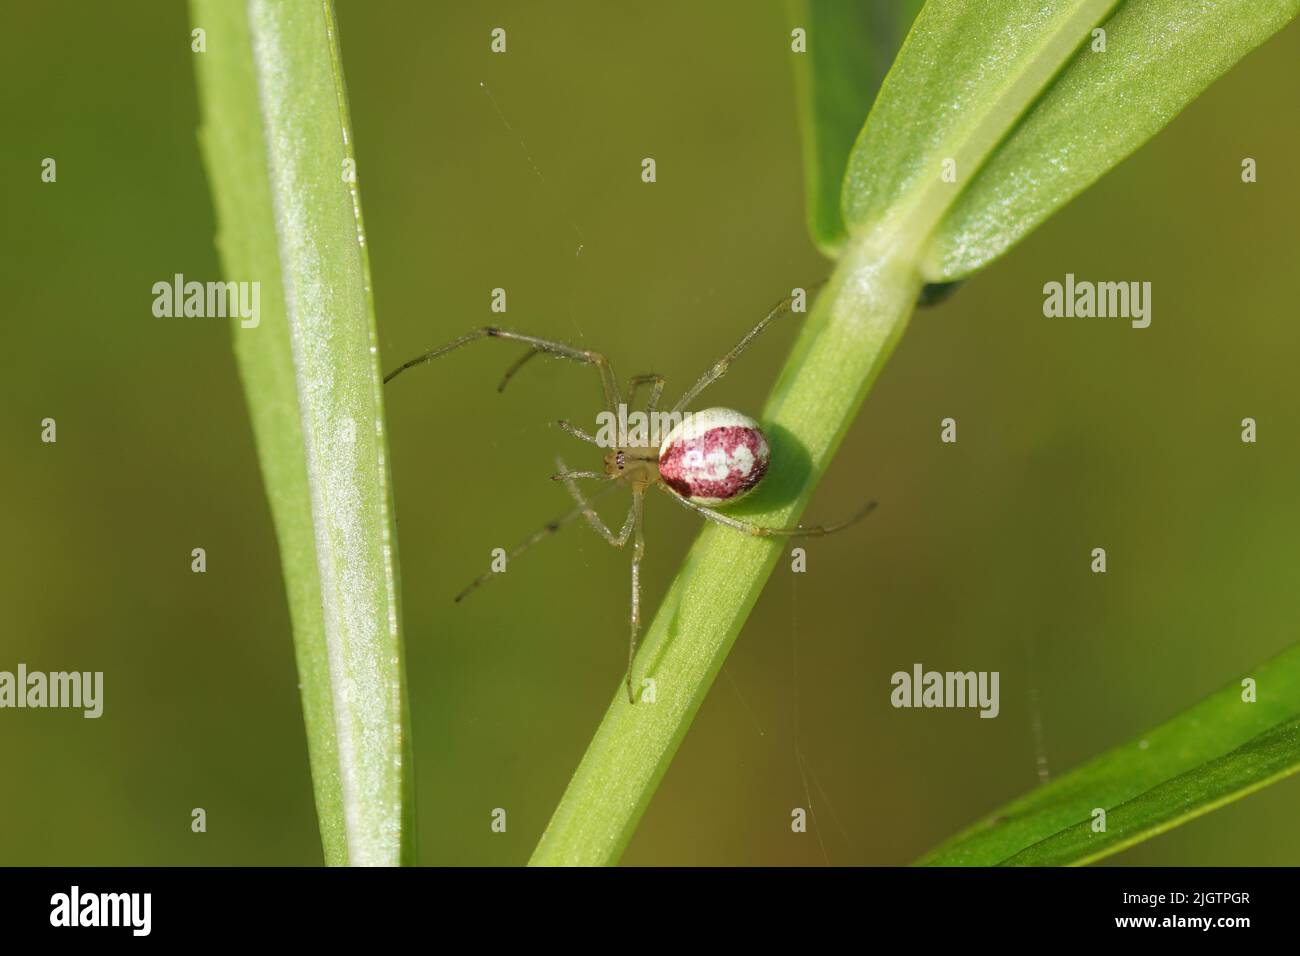 Closeup of the spider Enoplognatha ovata or the similar Enoplognatha latimana, family Theridiidae. In a plant. July, Dutch garden. Stock Photo